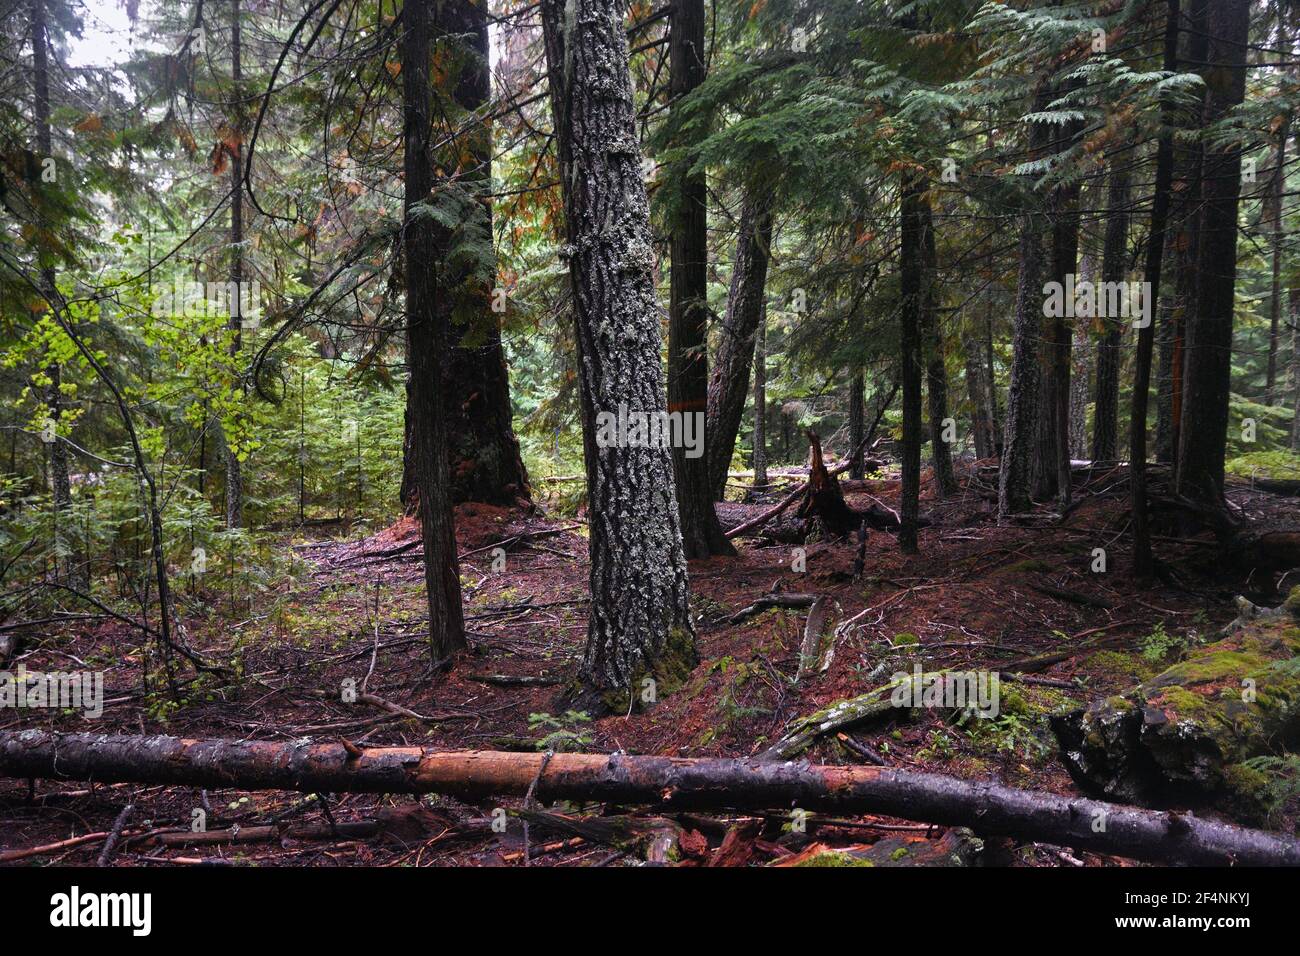 Old-growth forest proposed for logging, unit 4, in Black Ram project. Kootenai National Forest, Yaak Valley, Montana. (Photo by Randy Beacham) Stock Photo